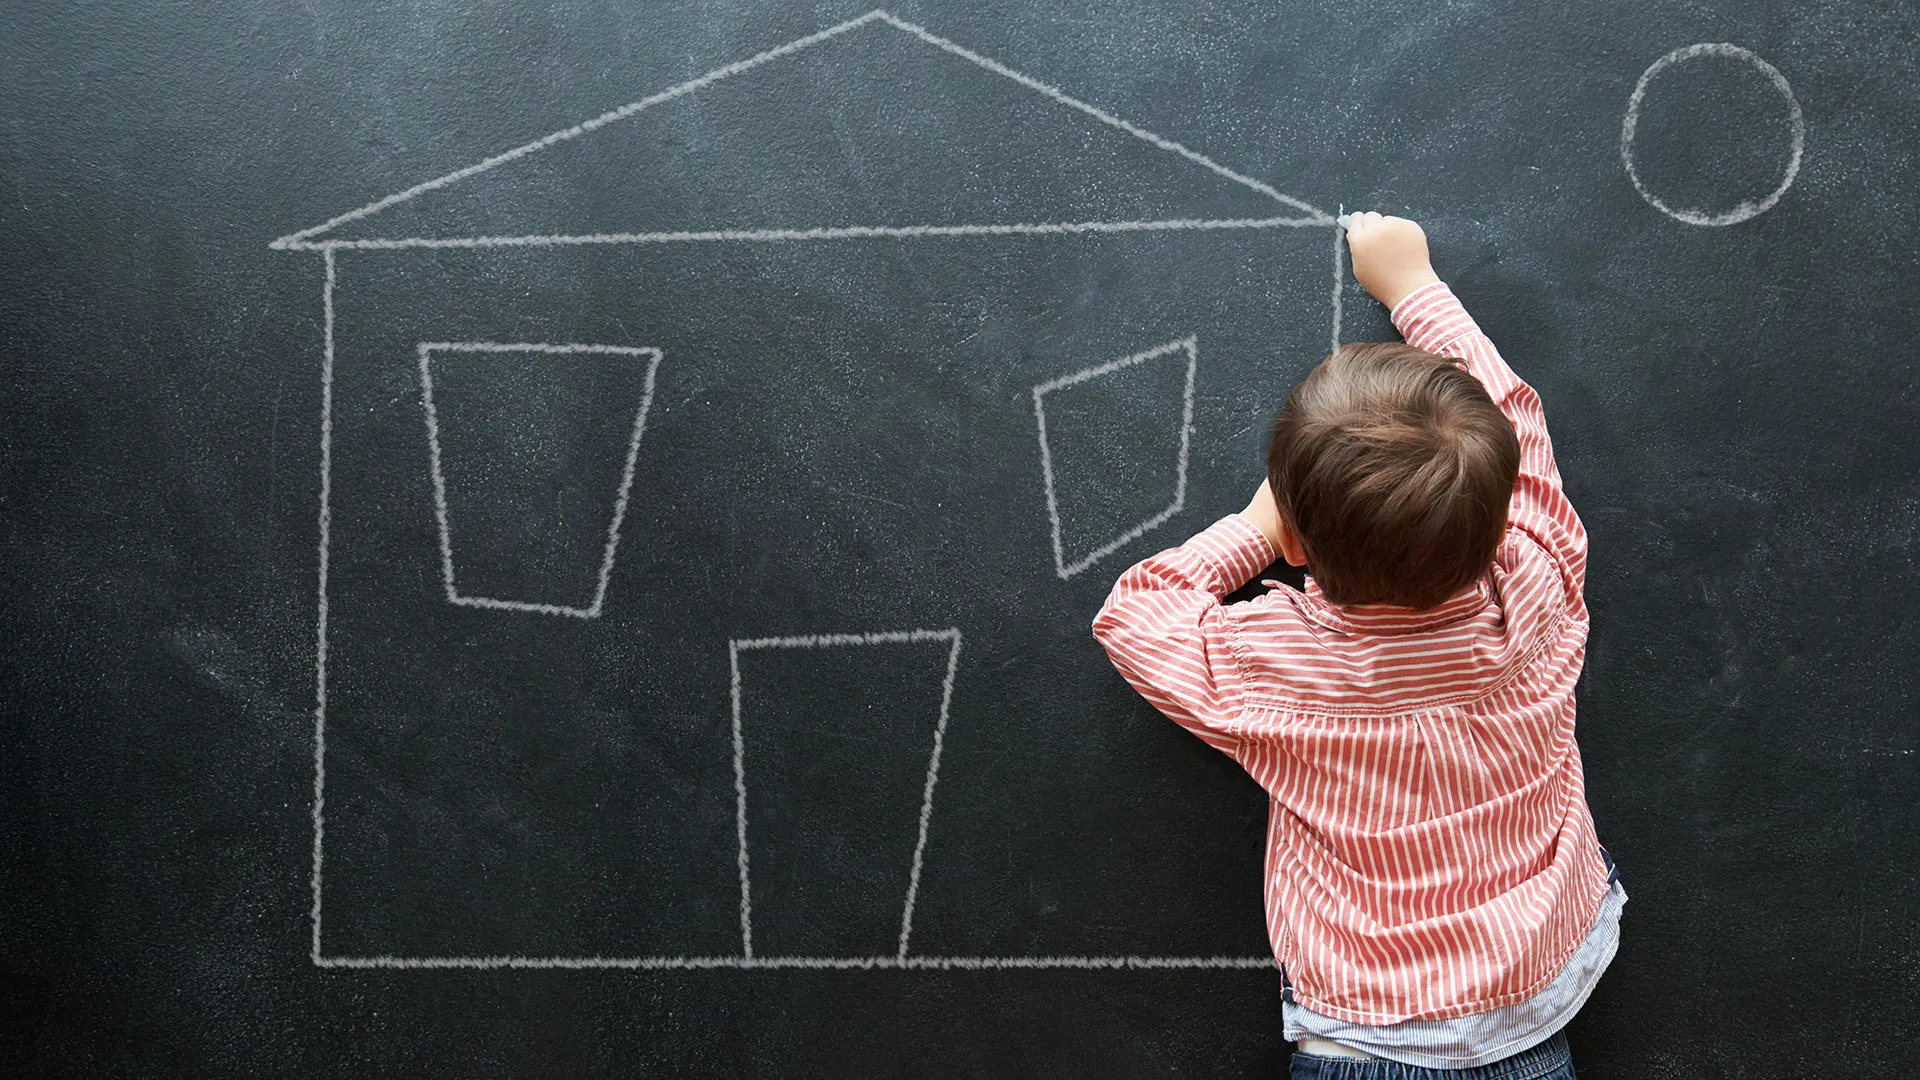 kid drawing house outline with chalk